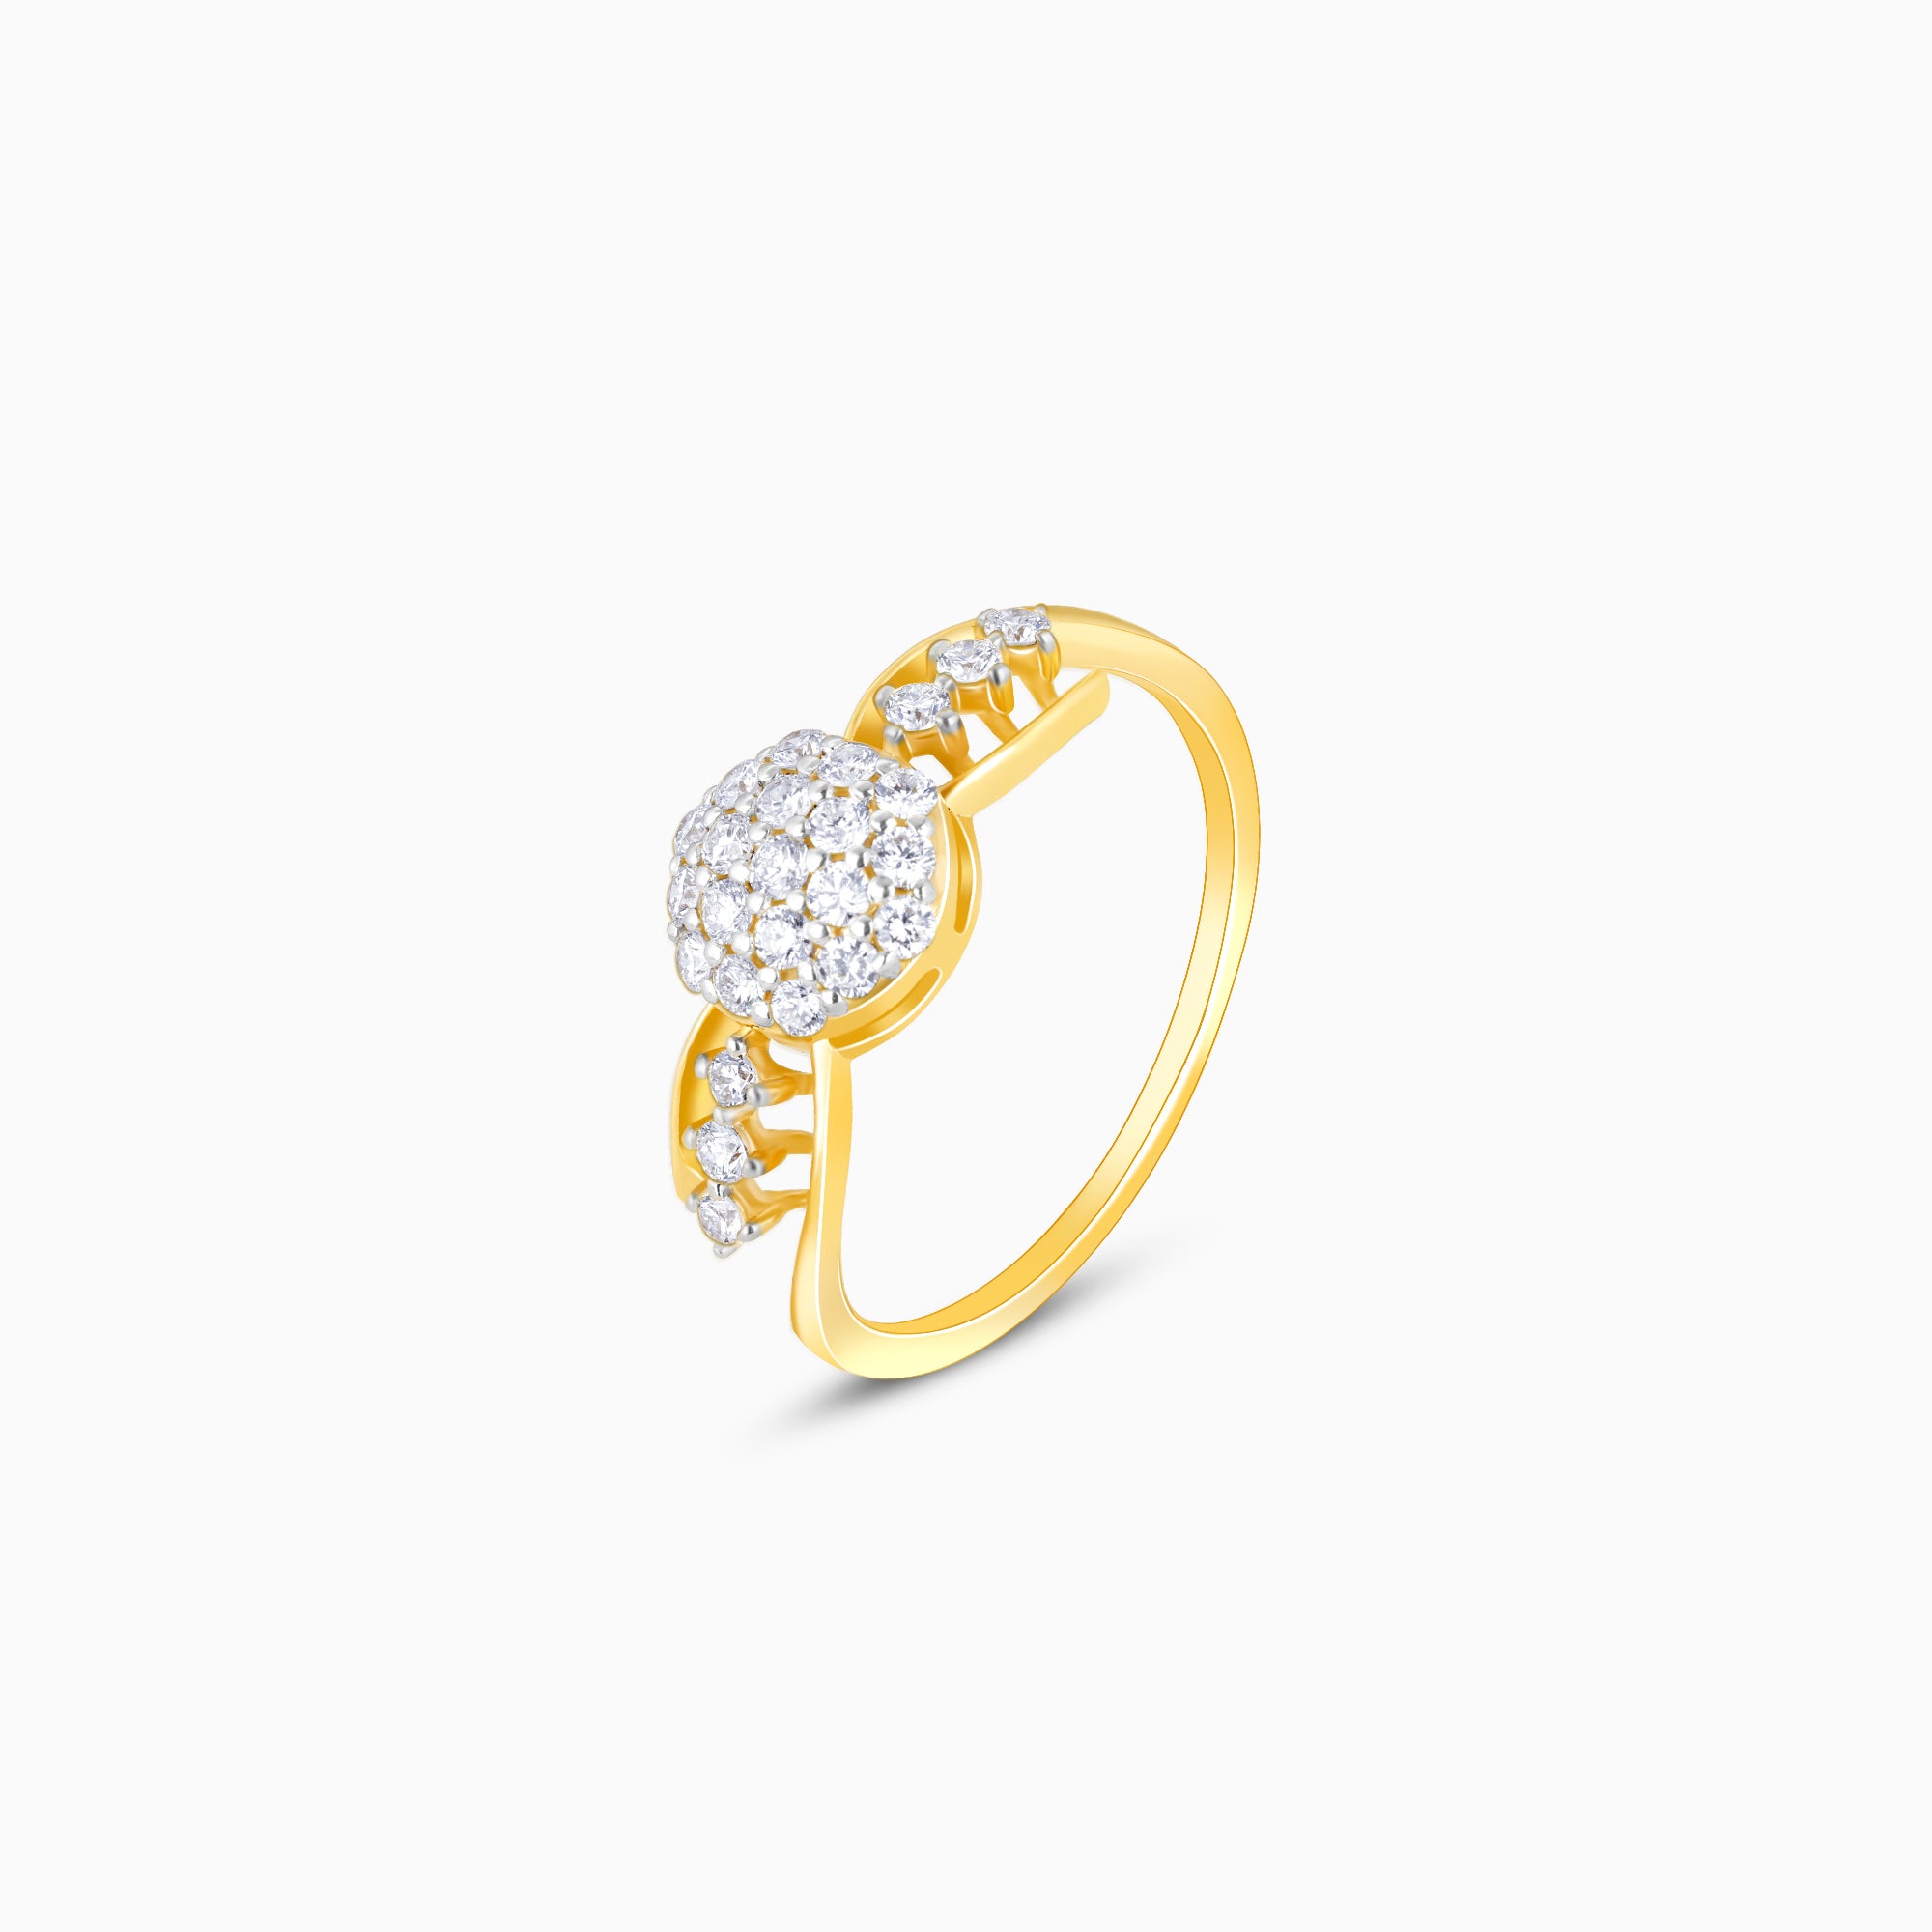 Buy Scintillating Swirly Gold Rings |GRT Jewellers